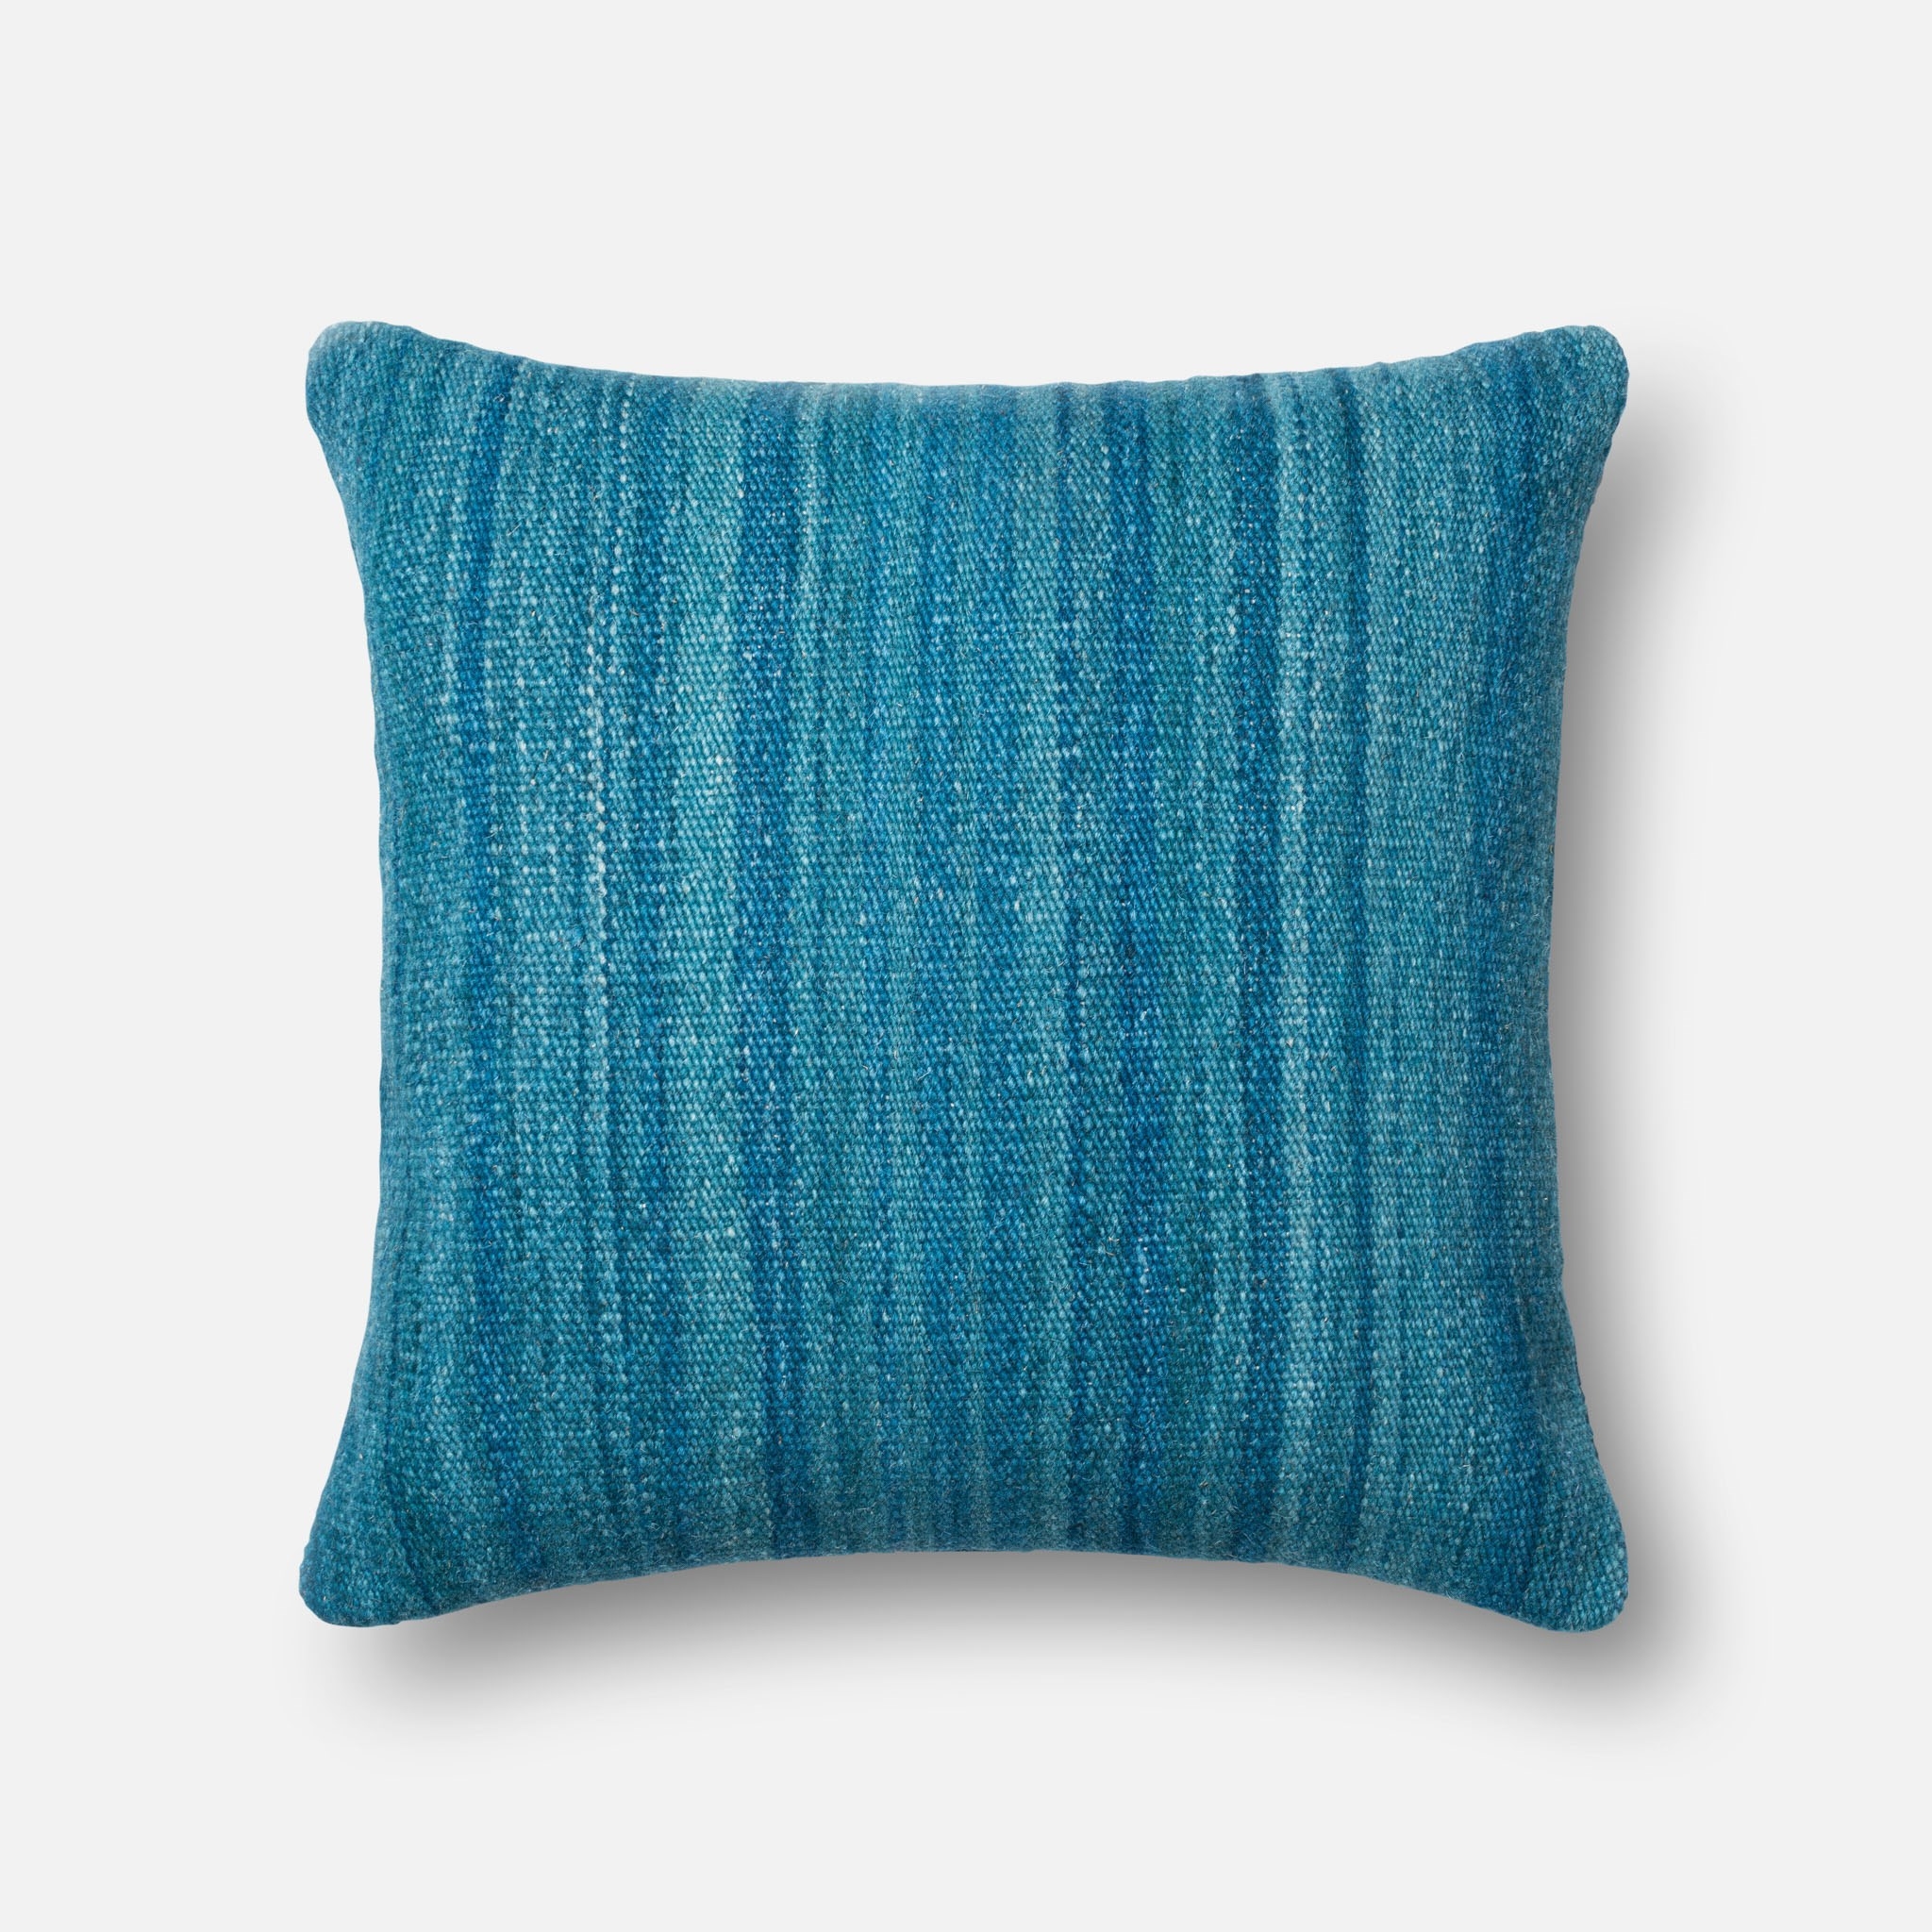 P0167 BLUE Pillow - 22" x 22" with Down Insert - Image 0